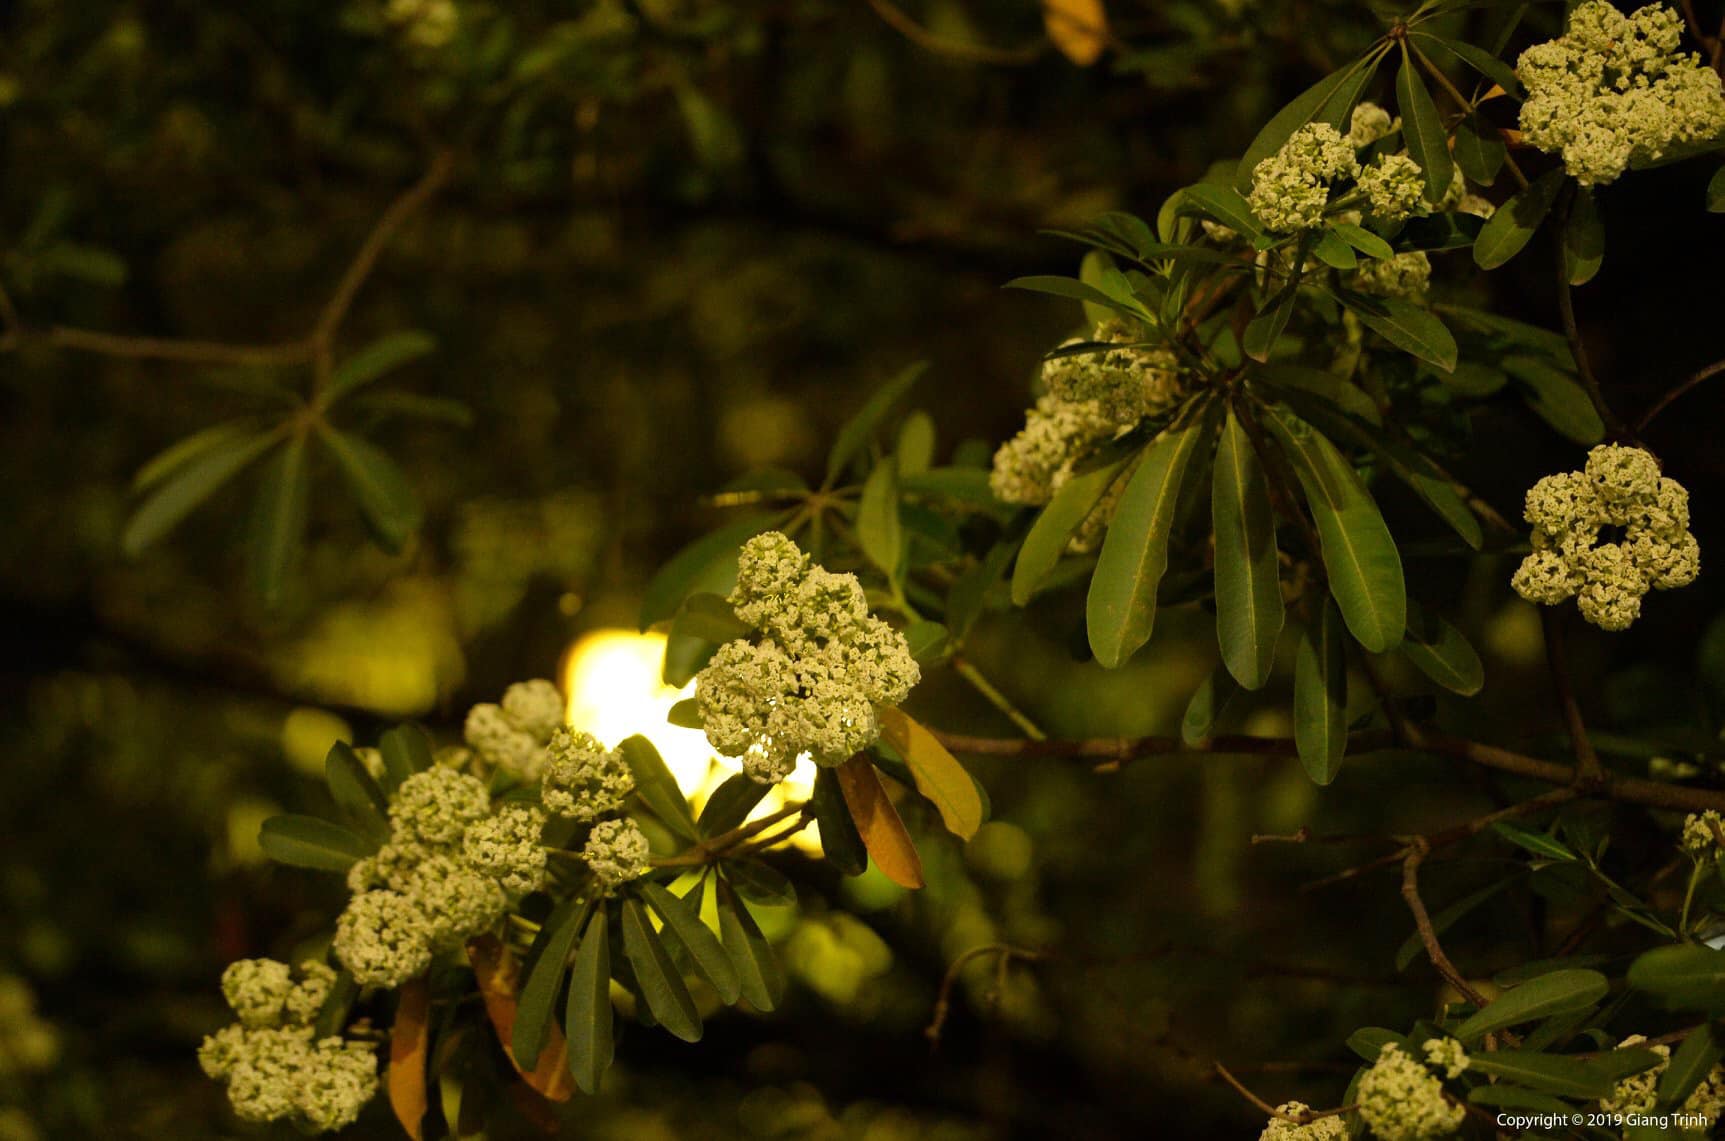 Hoa Sua quietly show their scent at a lightly cold night in the autumn of Han